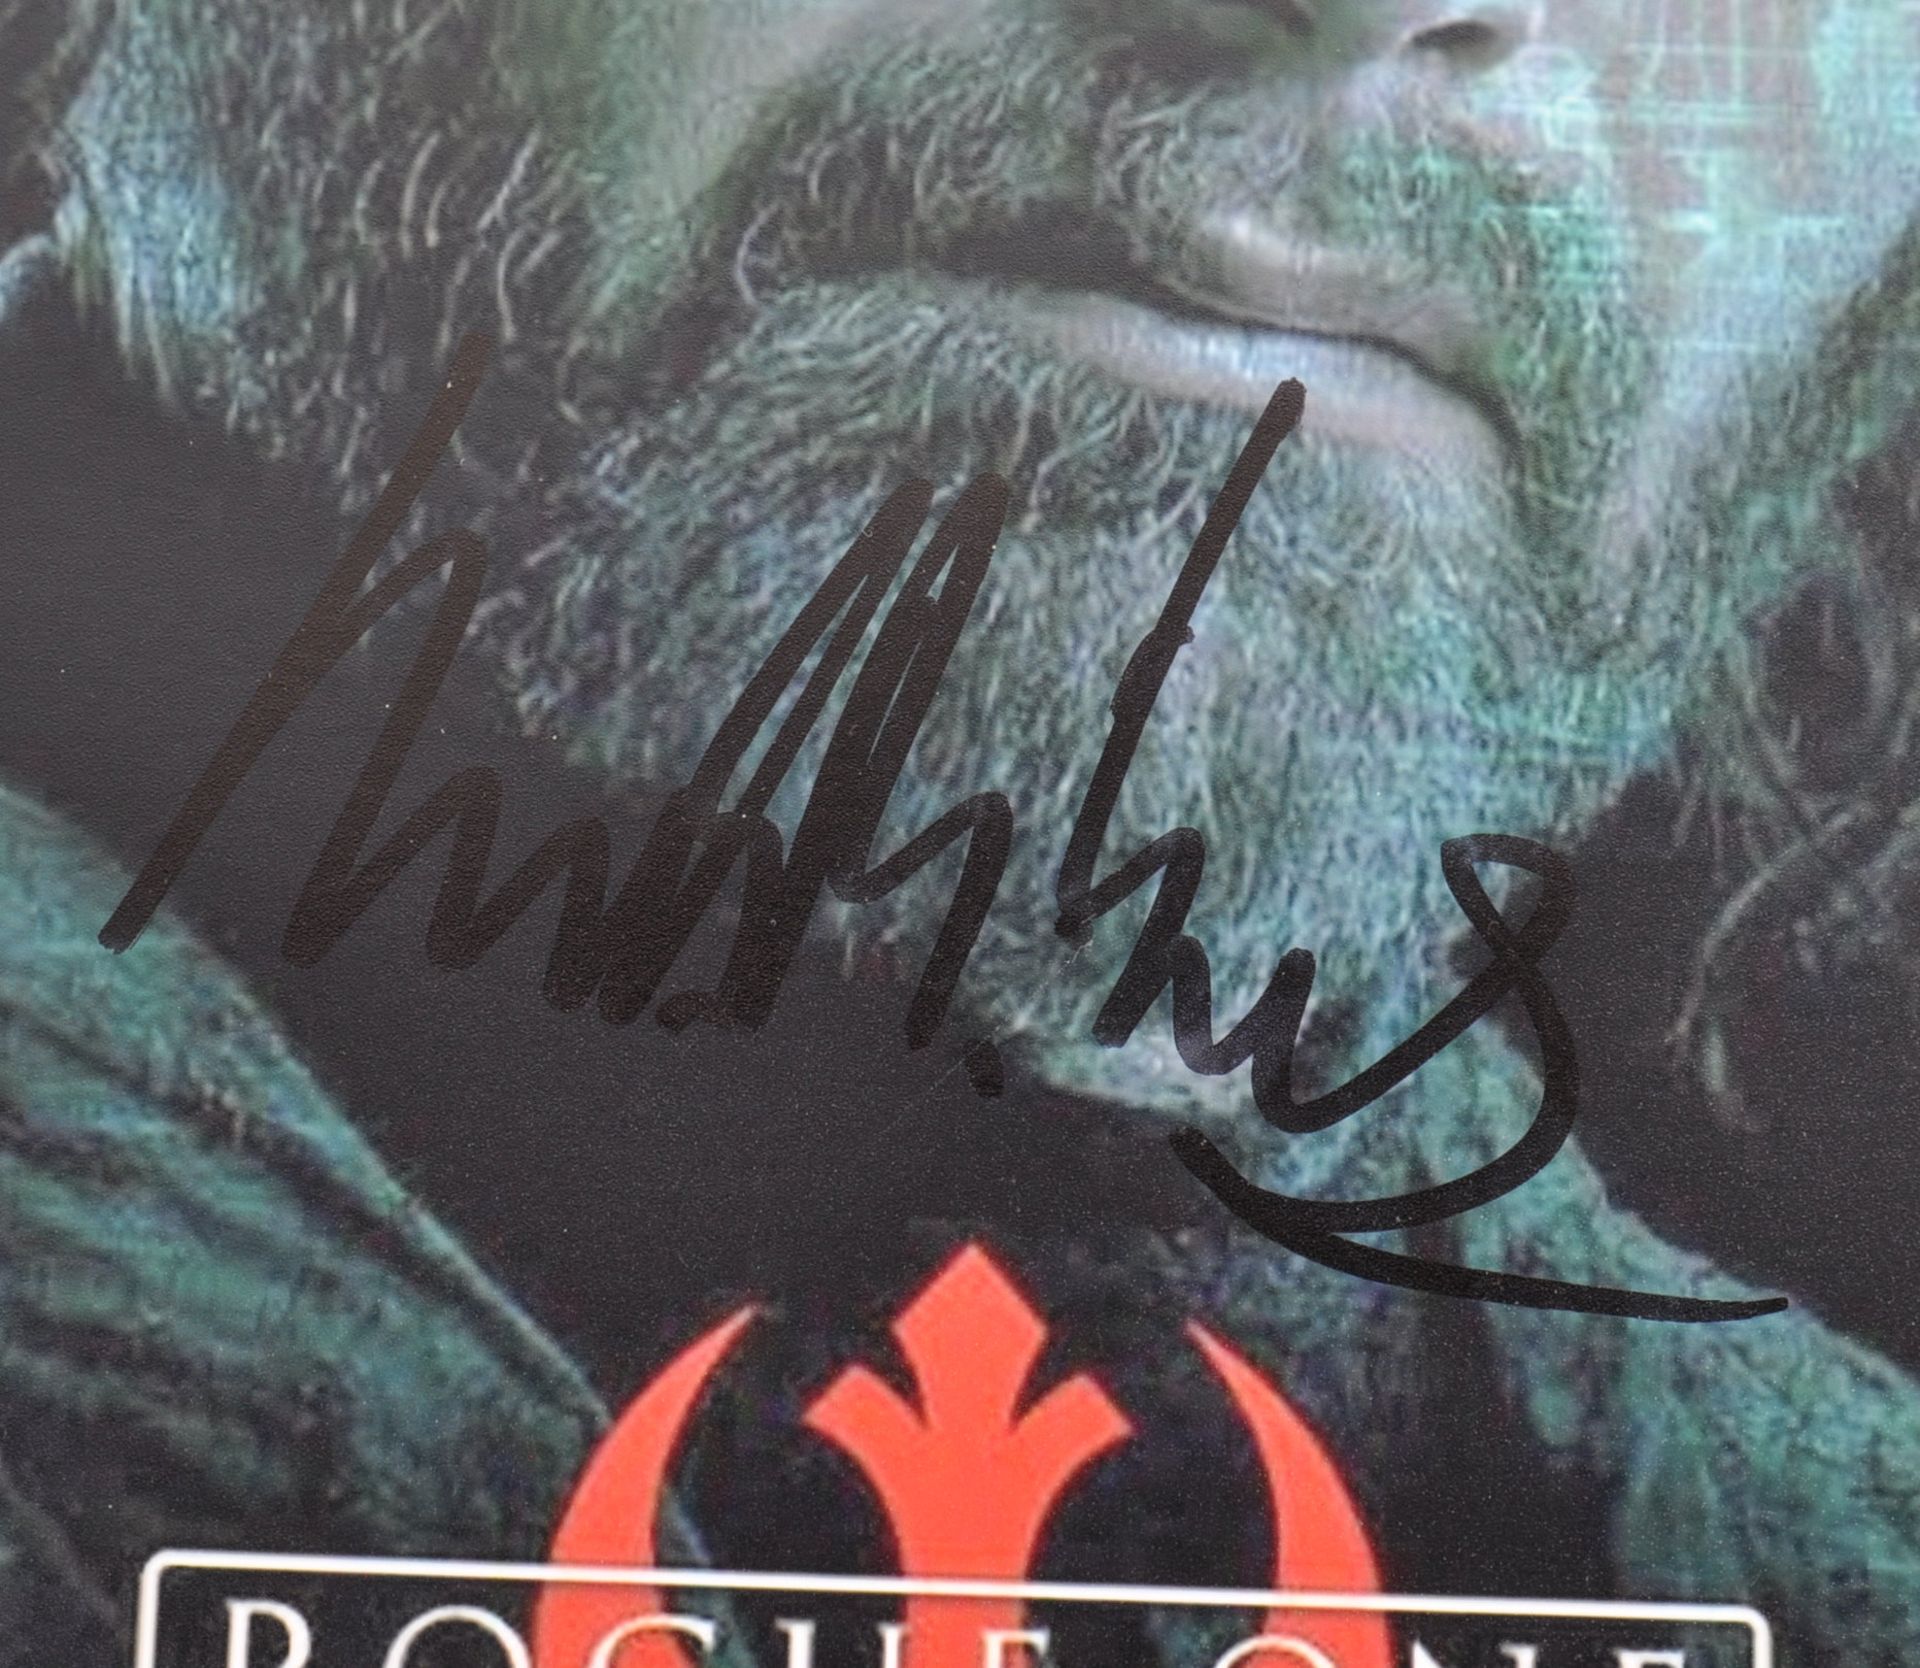 ROGUE ONE - STAR WARS - MADS MIKKELSEN AUTOGRAPHED PHOTO - Image 2 of 2